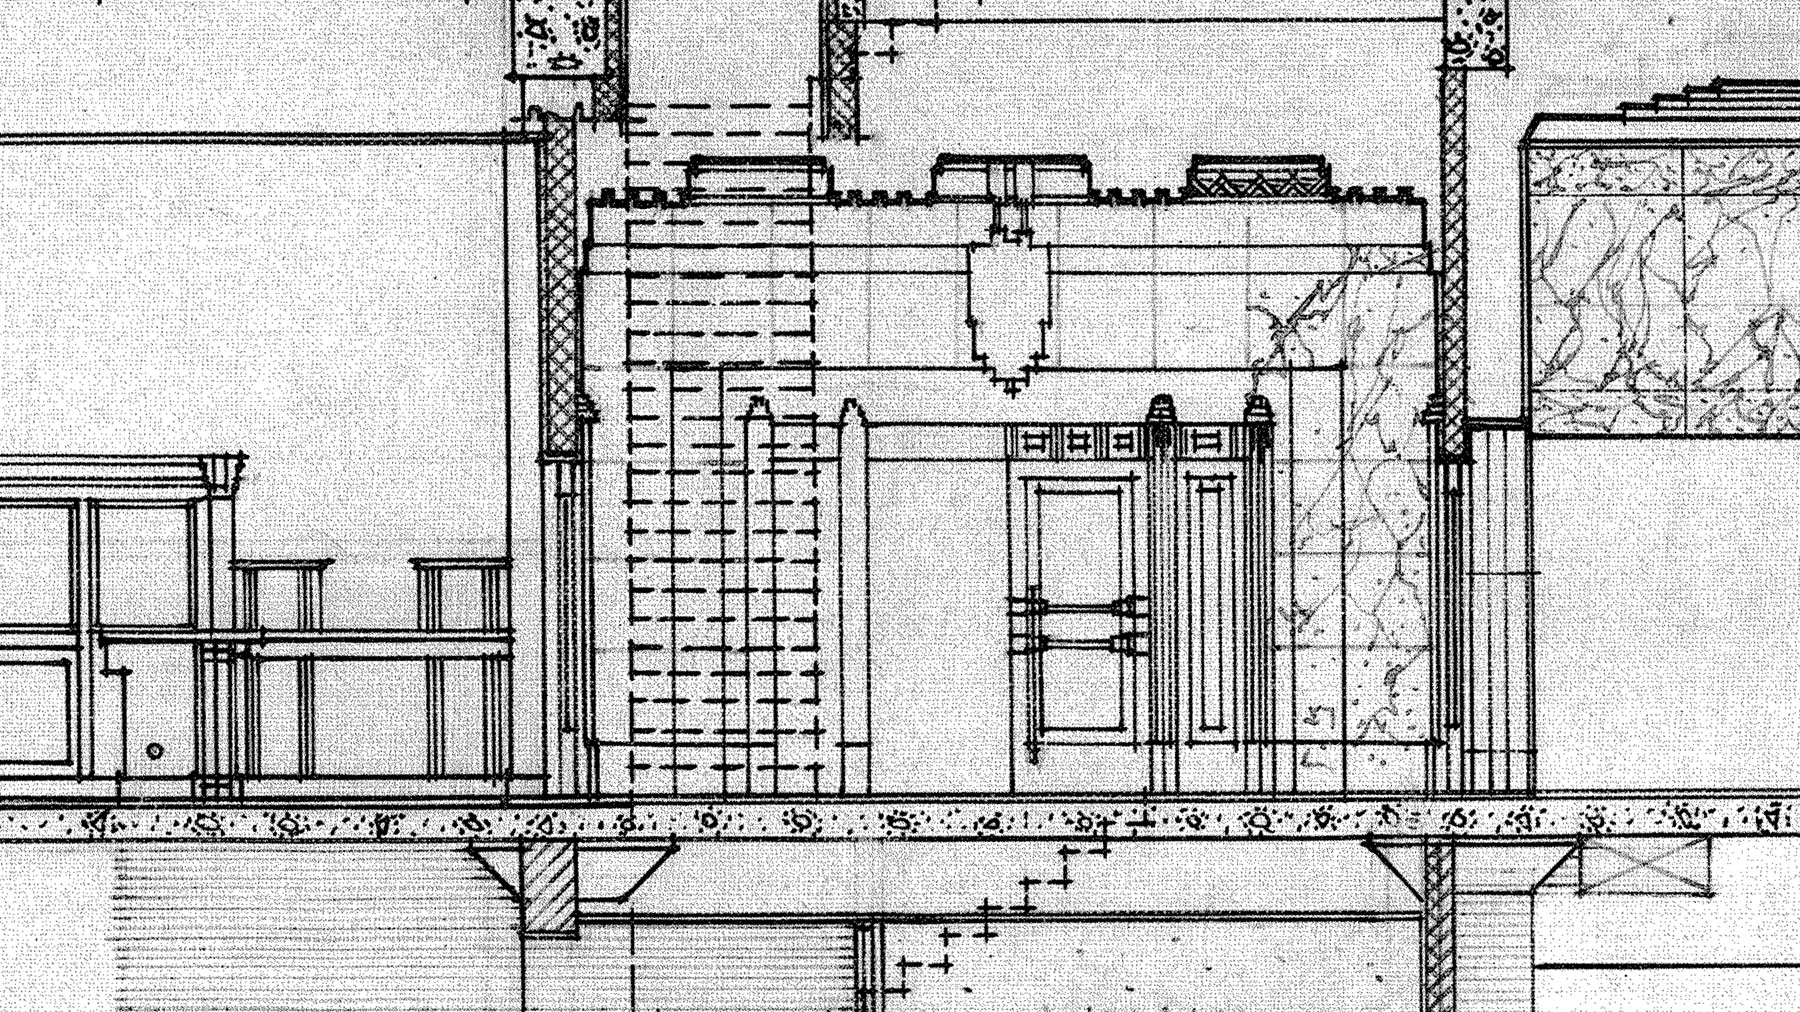 The Dominion Public Building: The Architectural Drawings - Section B
 